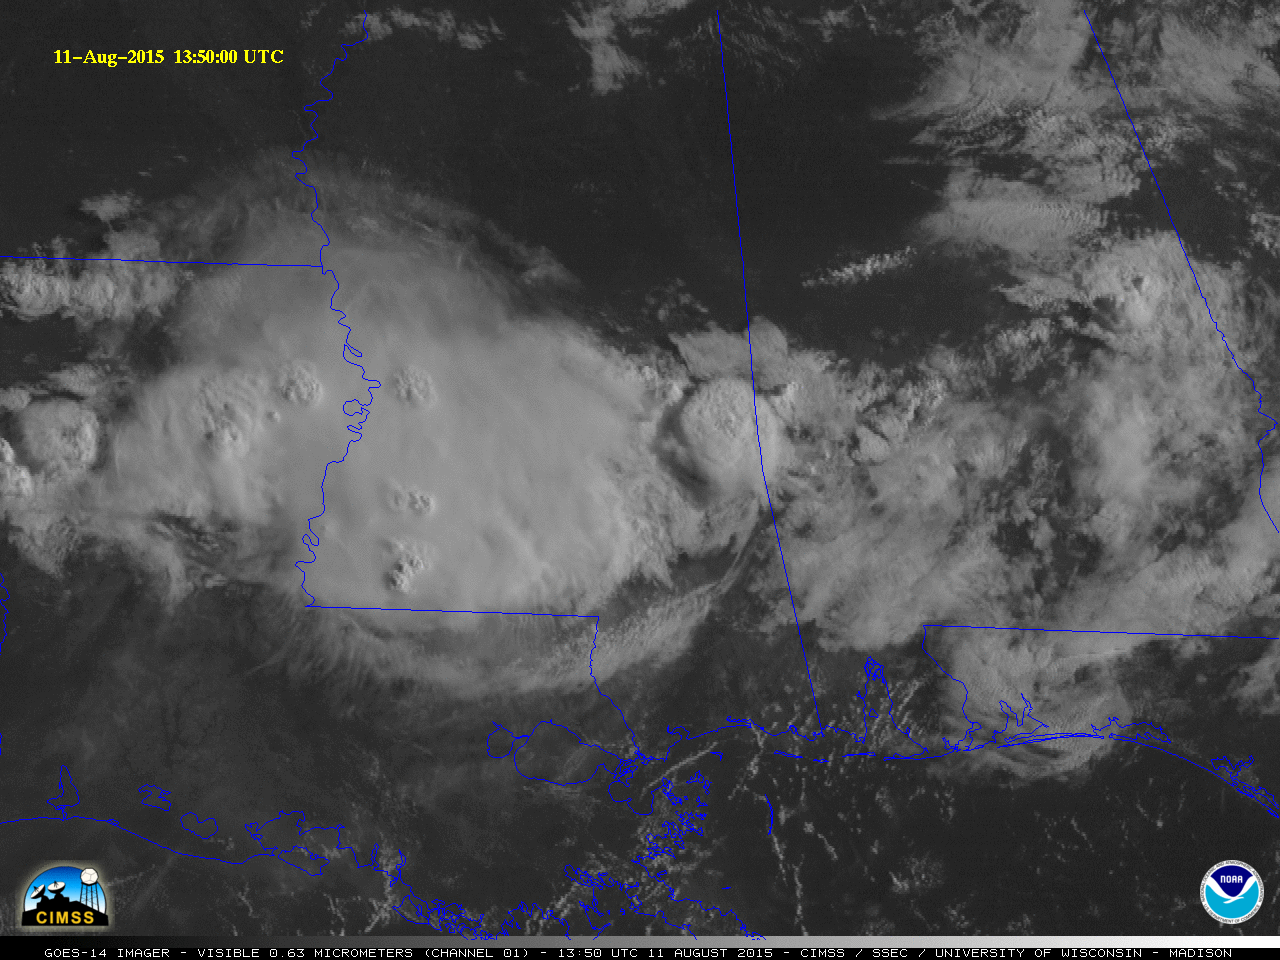 GOES-14 visible (0.63 µm) images [click to play MP4 animation]